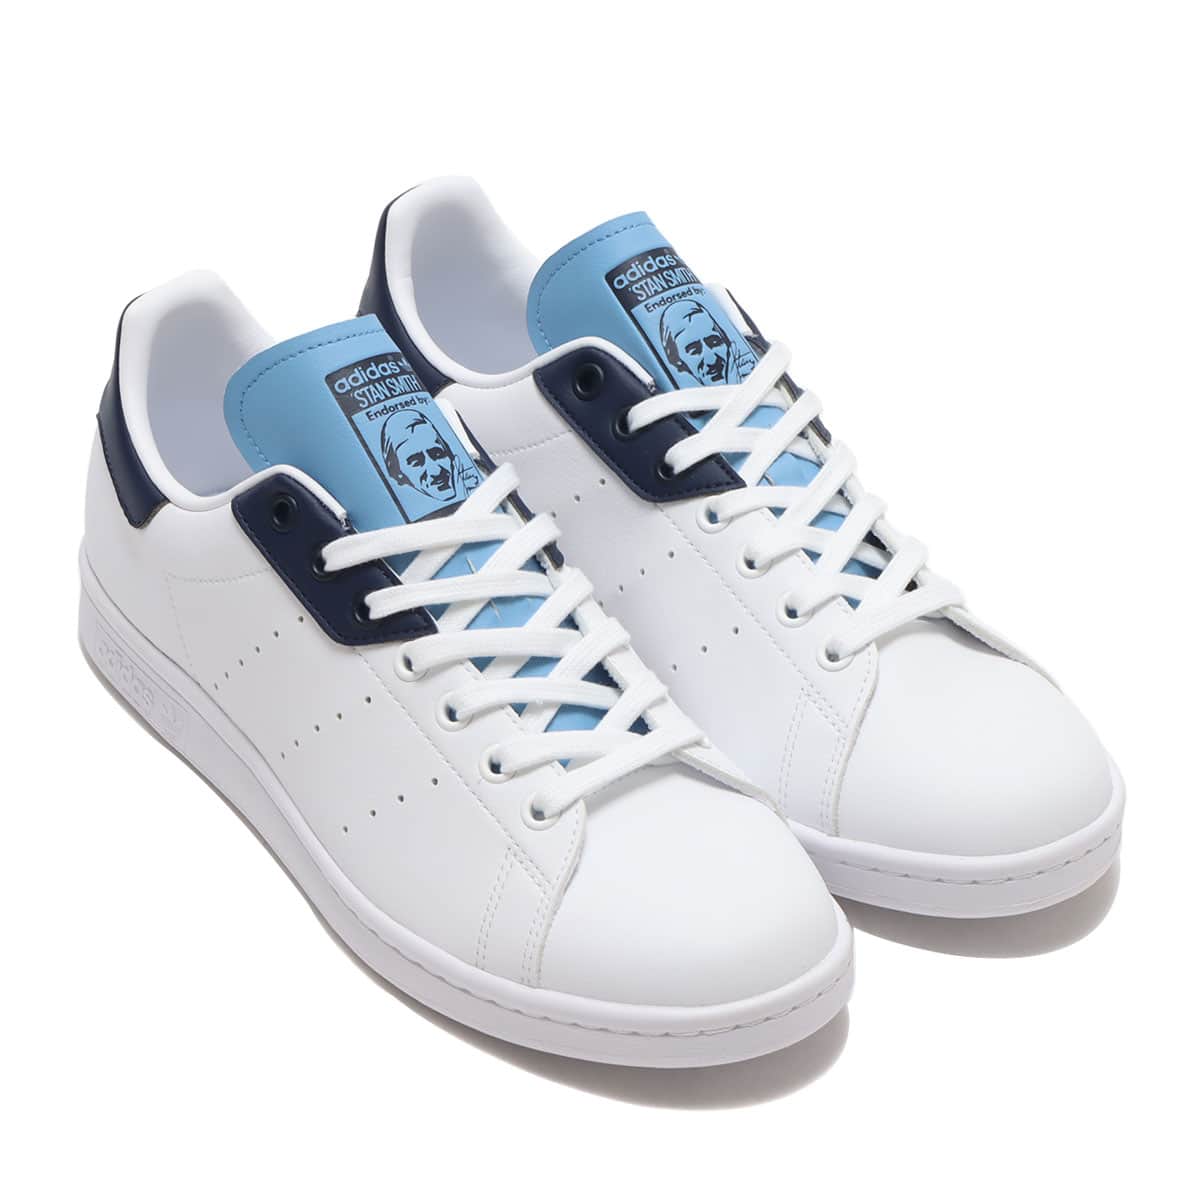 Surtido Basura Chaise longue adidas STAN SMITH FOOTWEAR WHITE/CALLEGE NAVY/RIGHT BLUE 21FW-I